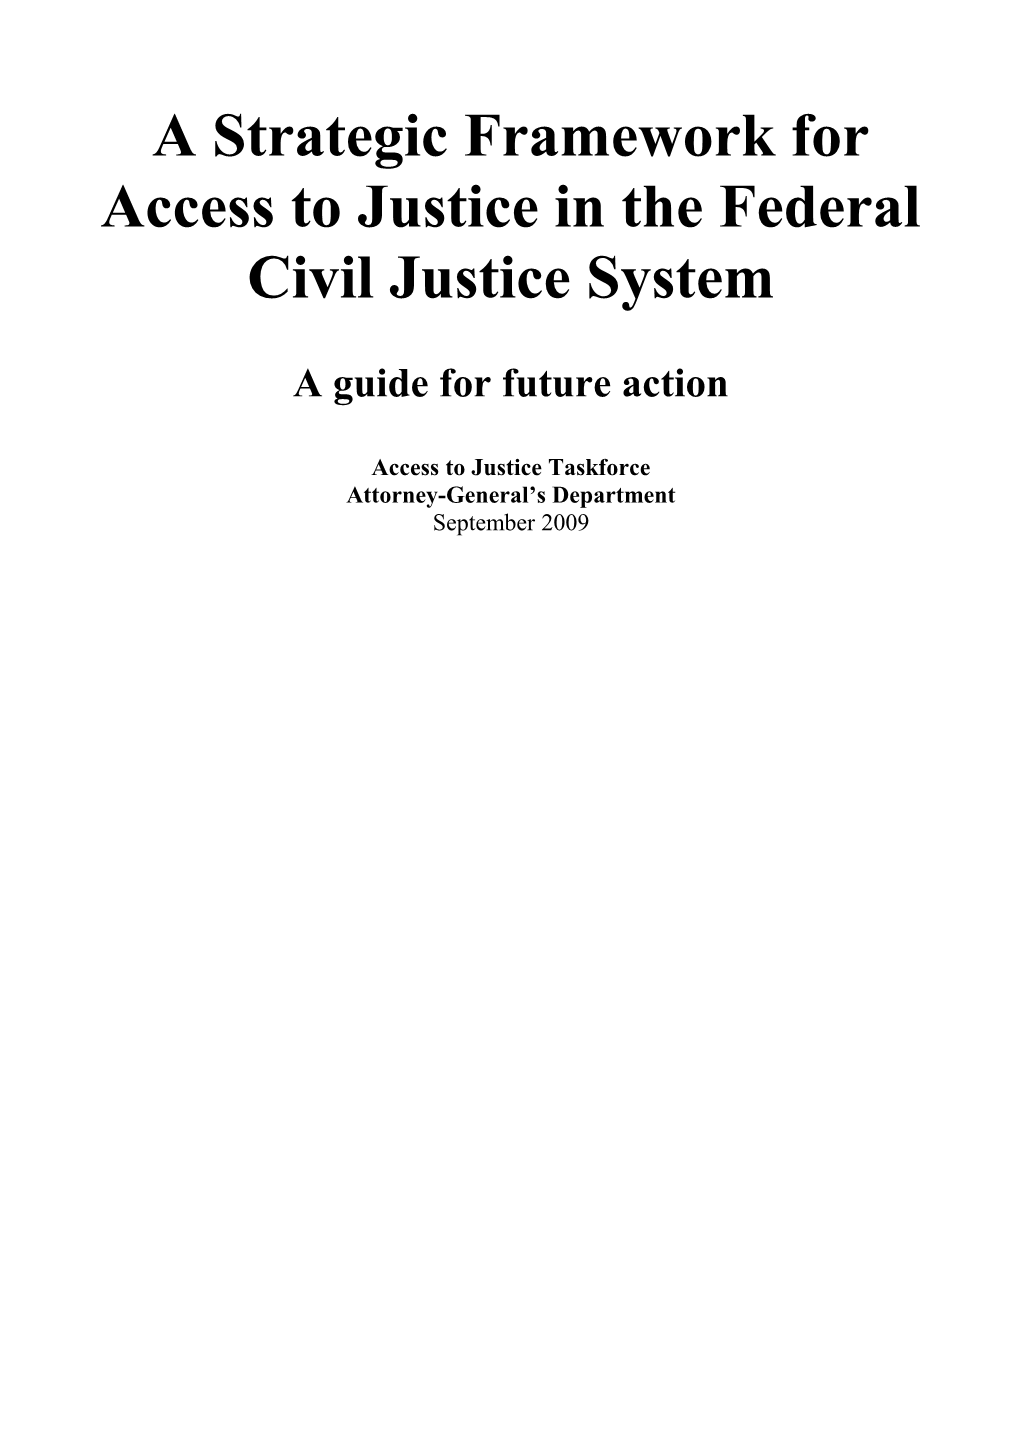 A Strategic Framework for Access to Justice in the Federal Civil Justice System